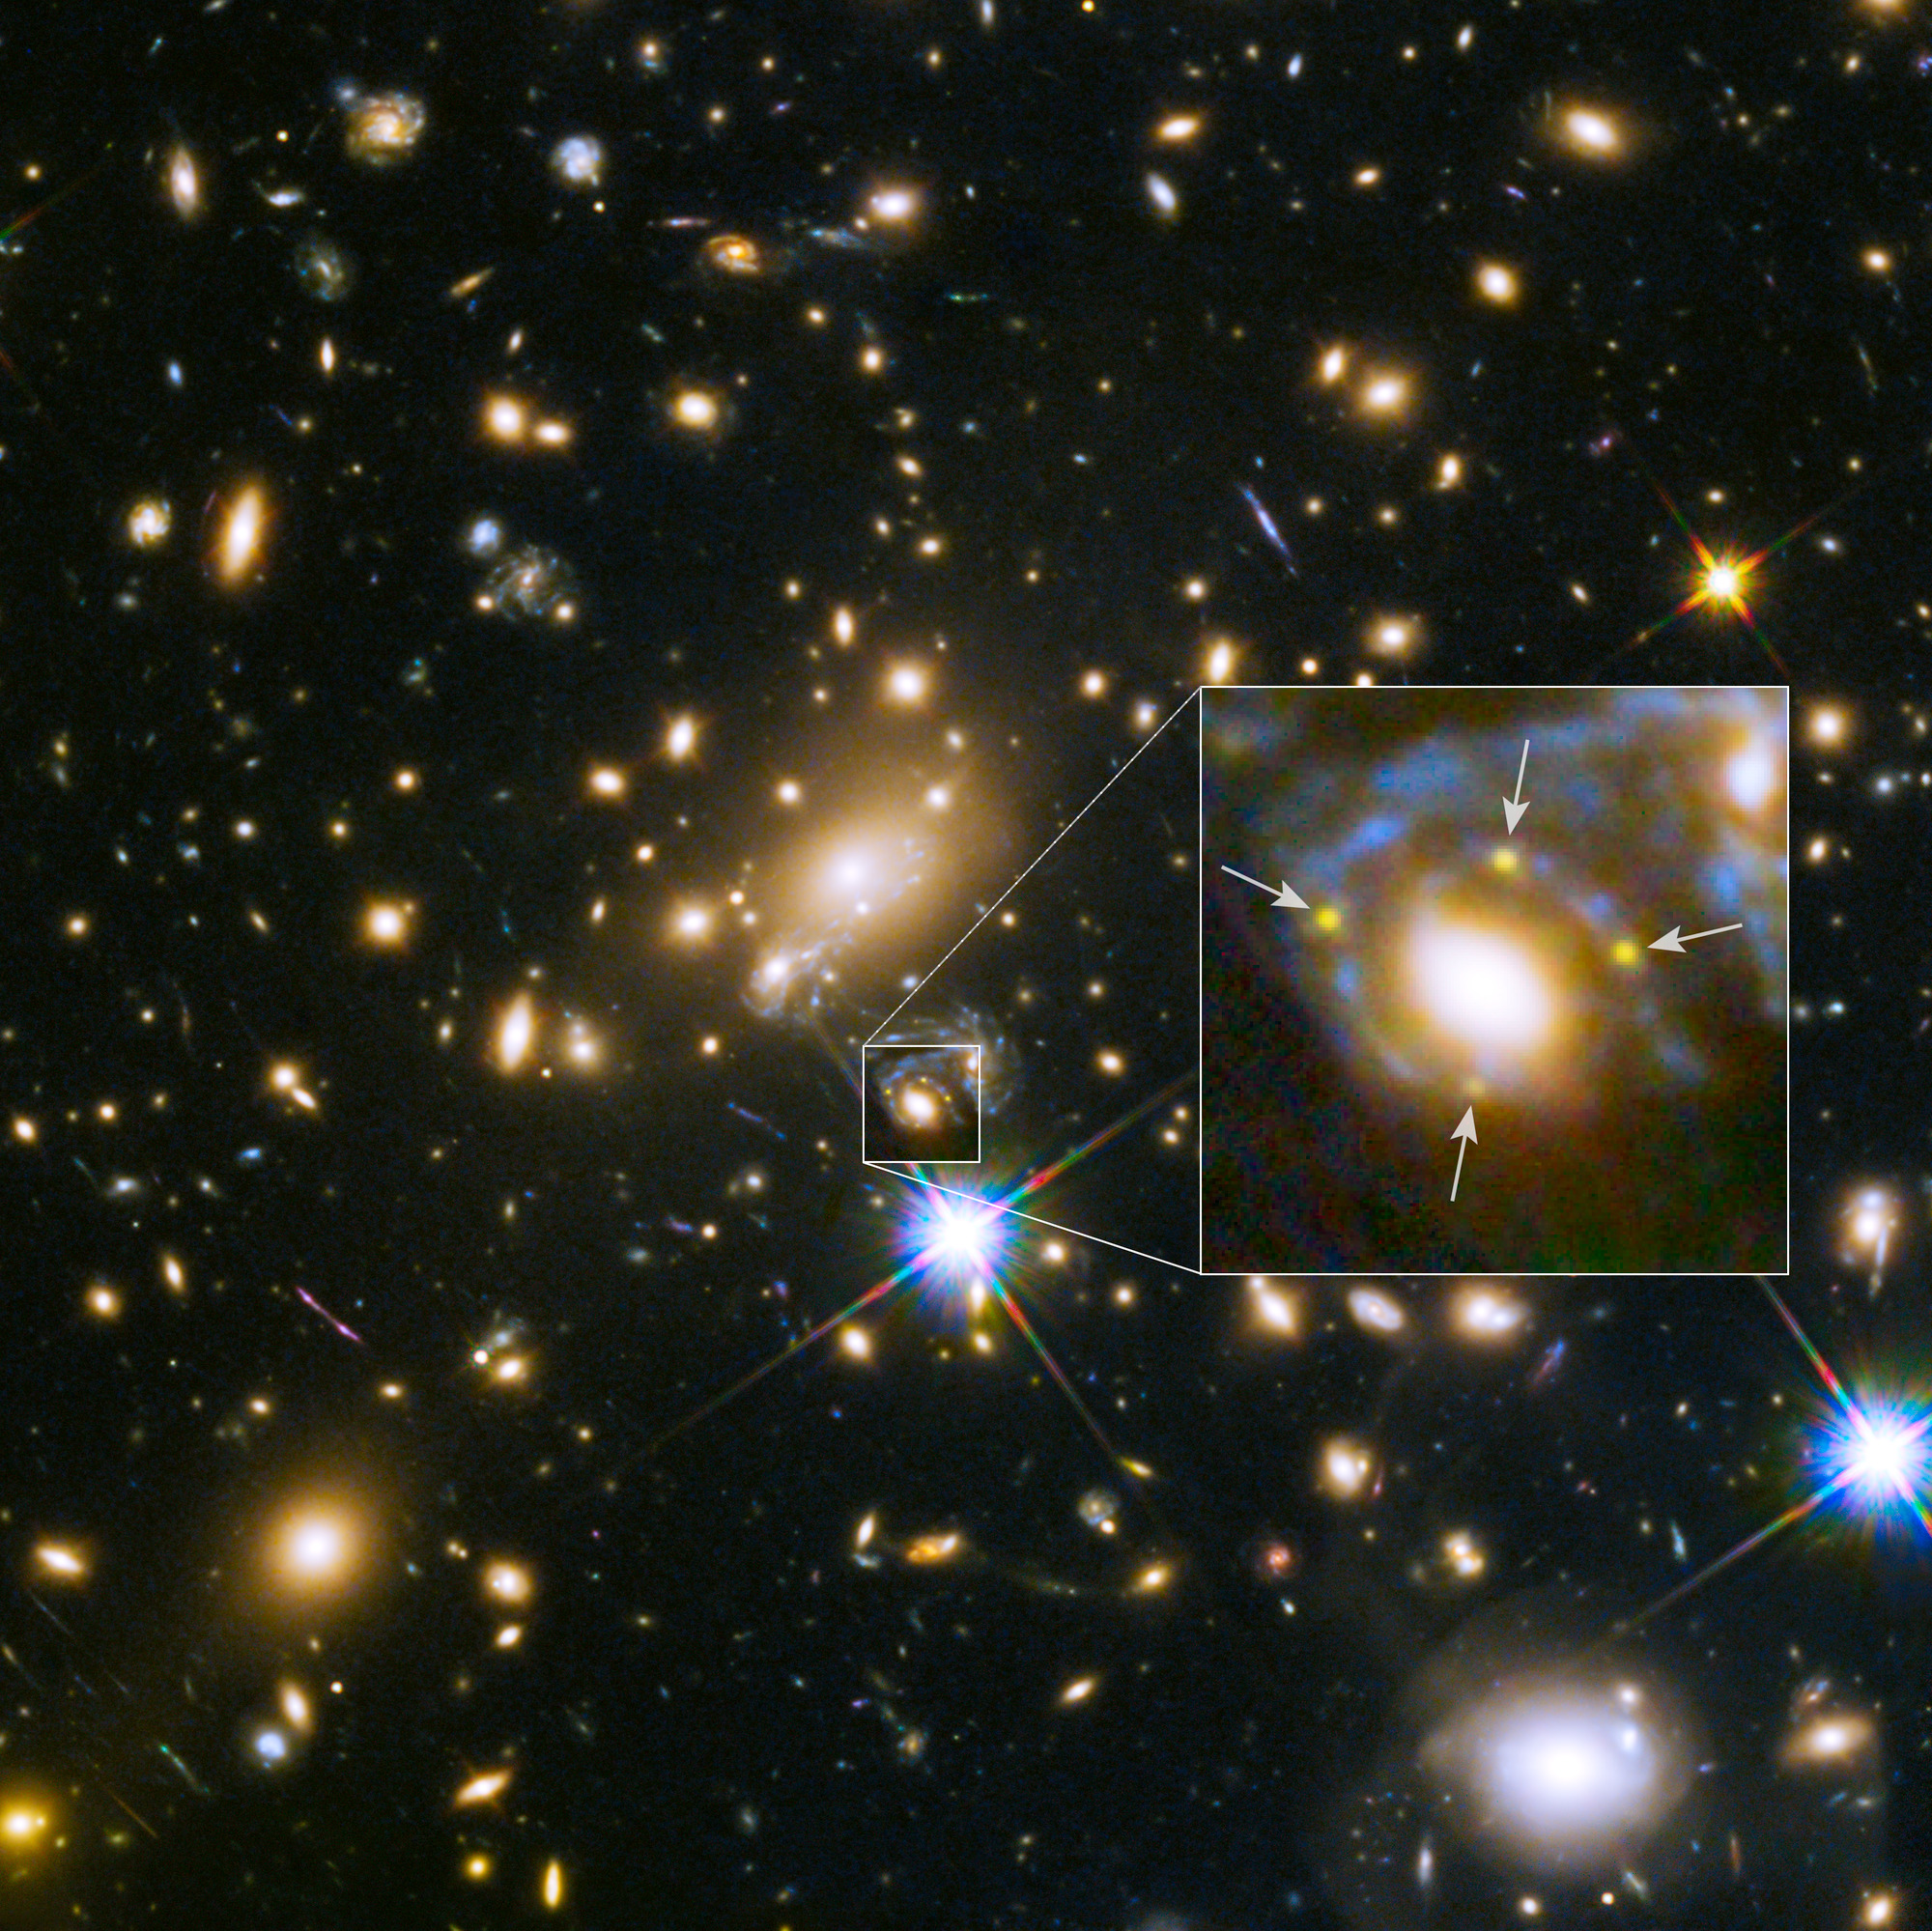 A field of galaxies on the black background of space. Some are blue and white, others glow yellow. In the middle of the field is a cluster of five yellowish spiral and elliptical galaxies that form a foreground galaxy cluster. There is one spiral galaxy just below the cluster that has a yellow-whiteish core and is surrounded by diffuse blue material. This galaxy is outlined by a white box, and lines extend from the box’s corners that leads to an enlarged view at the right. Four arrows point at yellow faint points of light that circle the central glow of the galaxy.